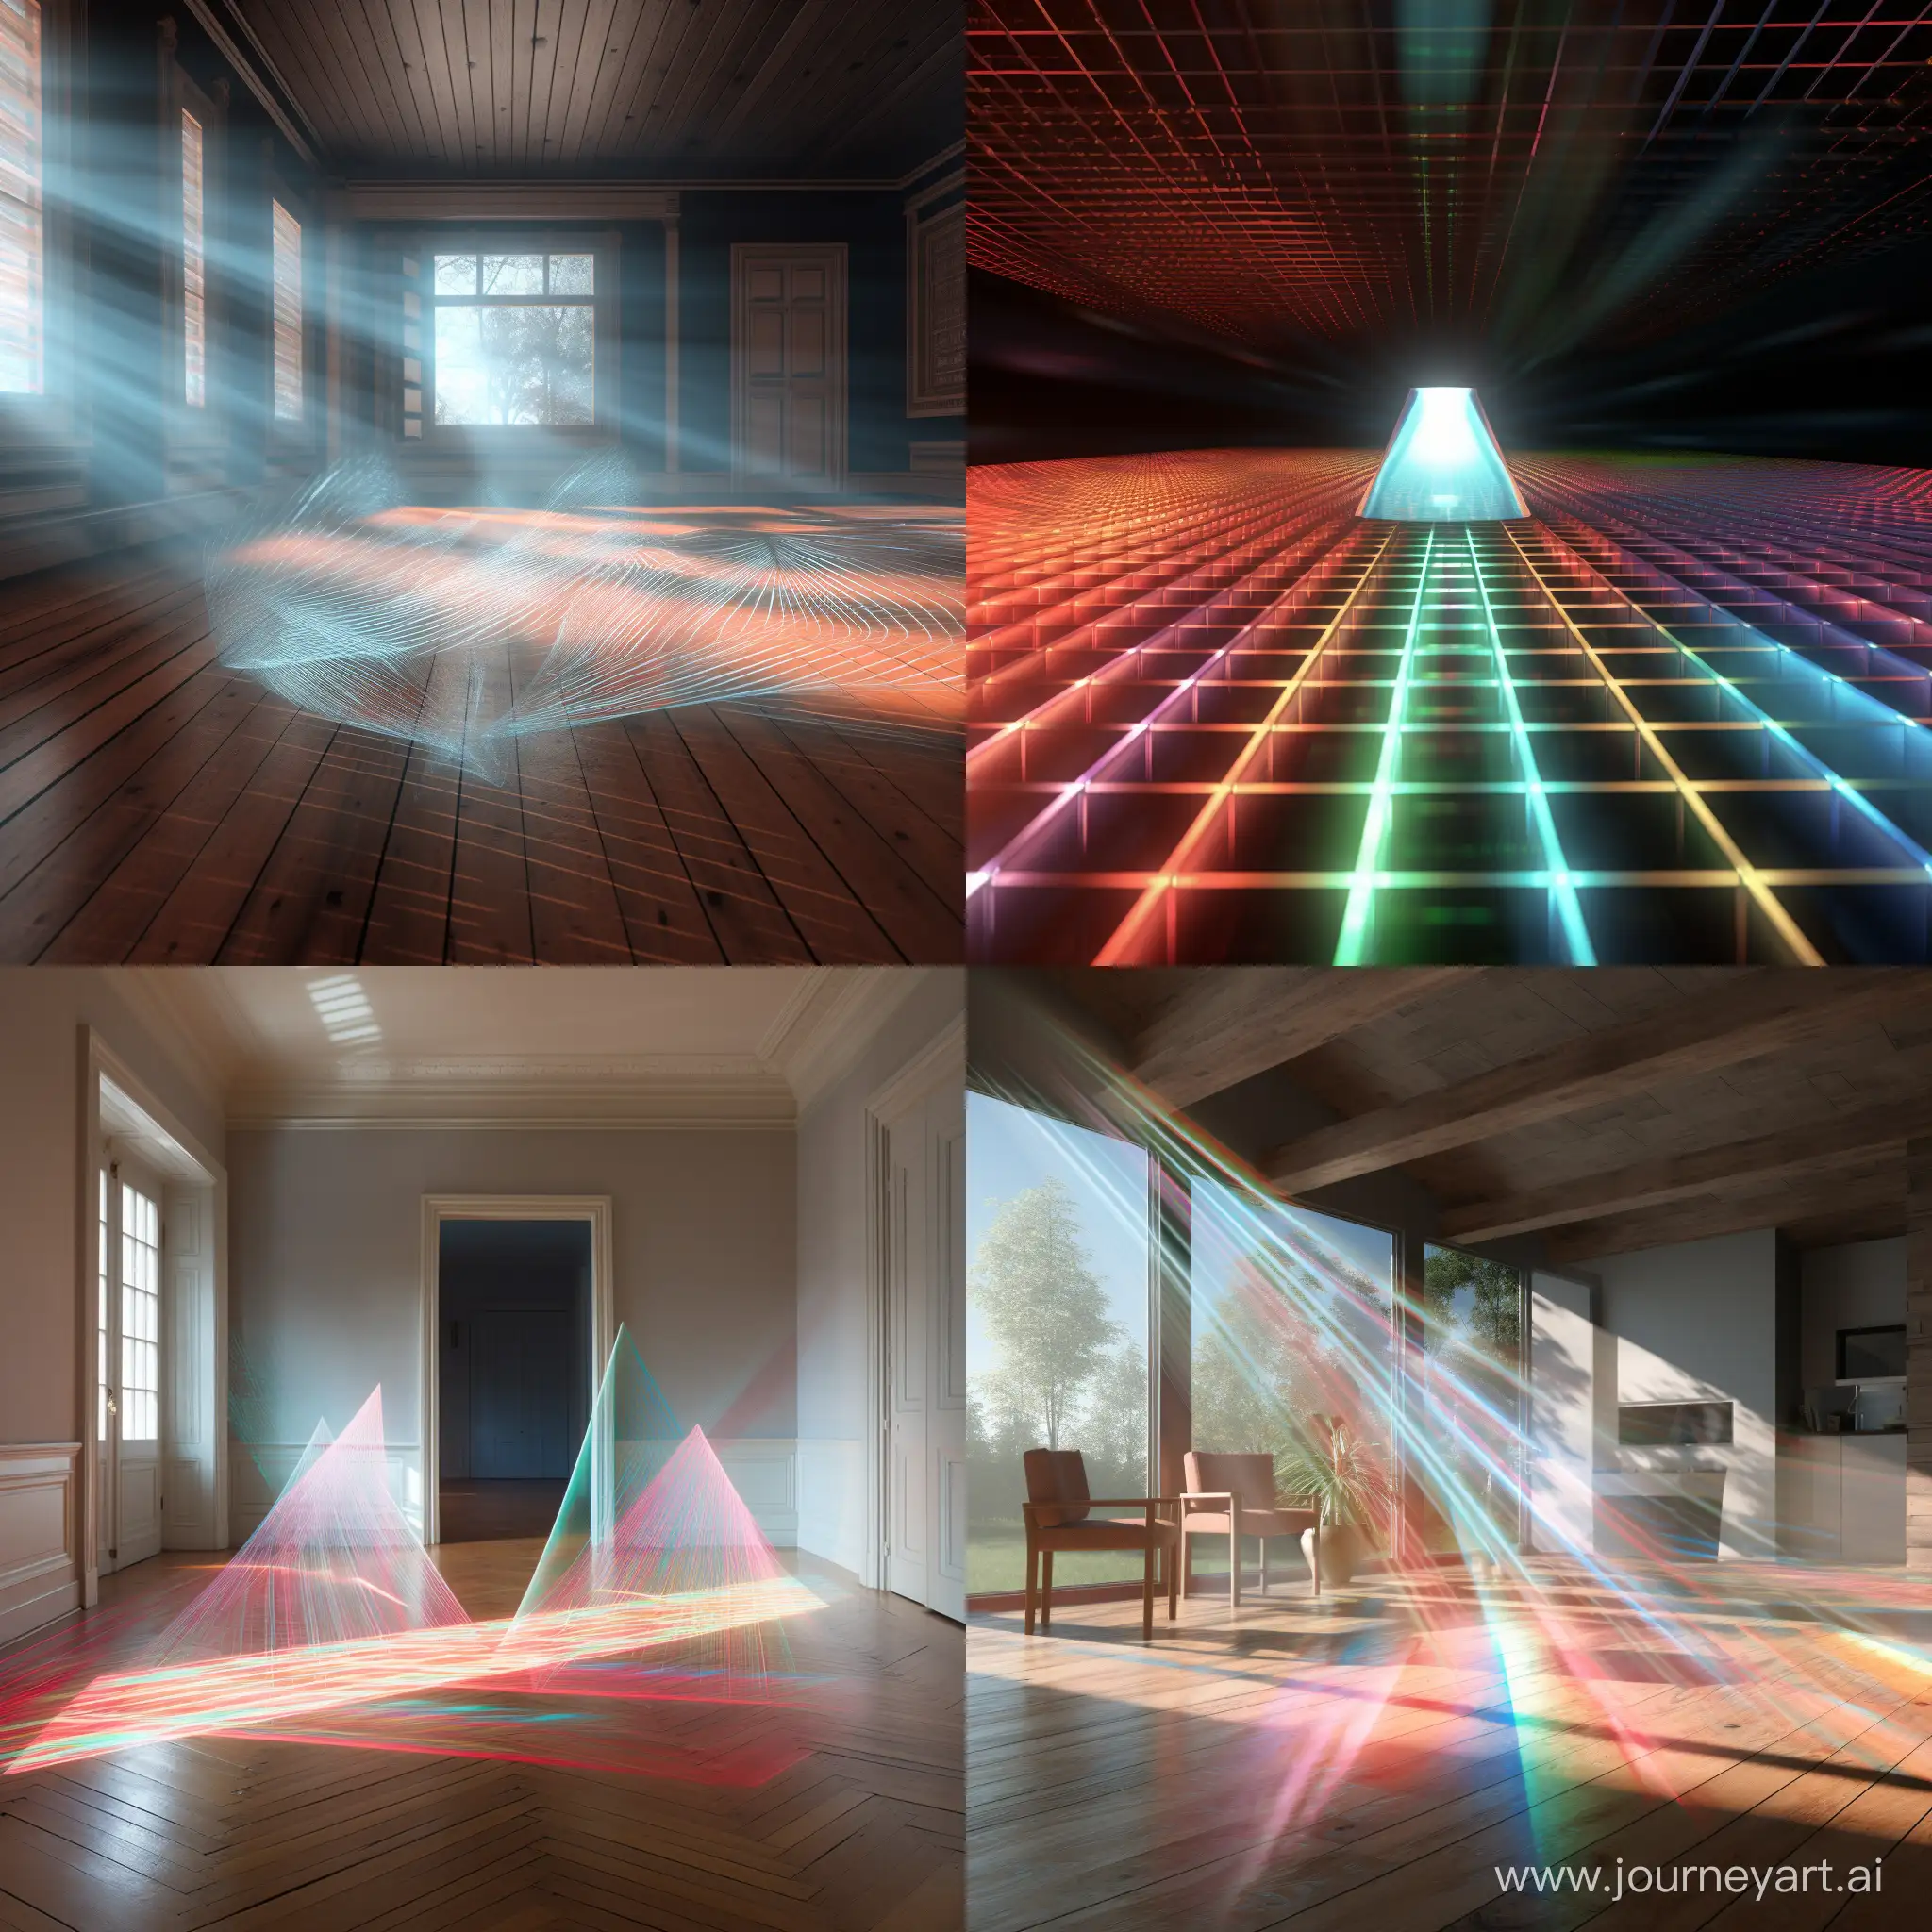 Photorealistic diffraction grating with light interference